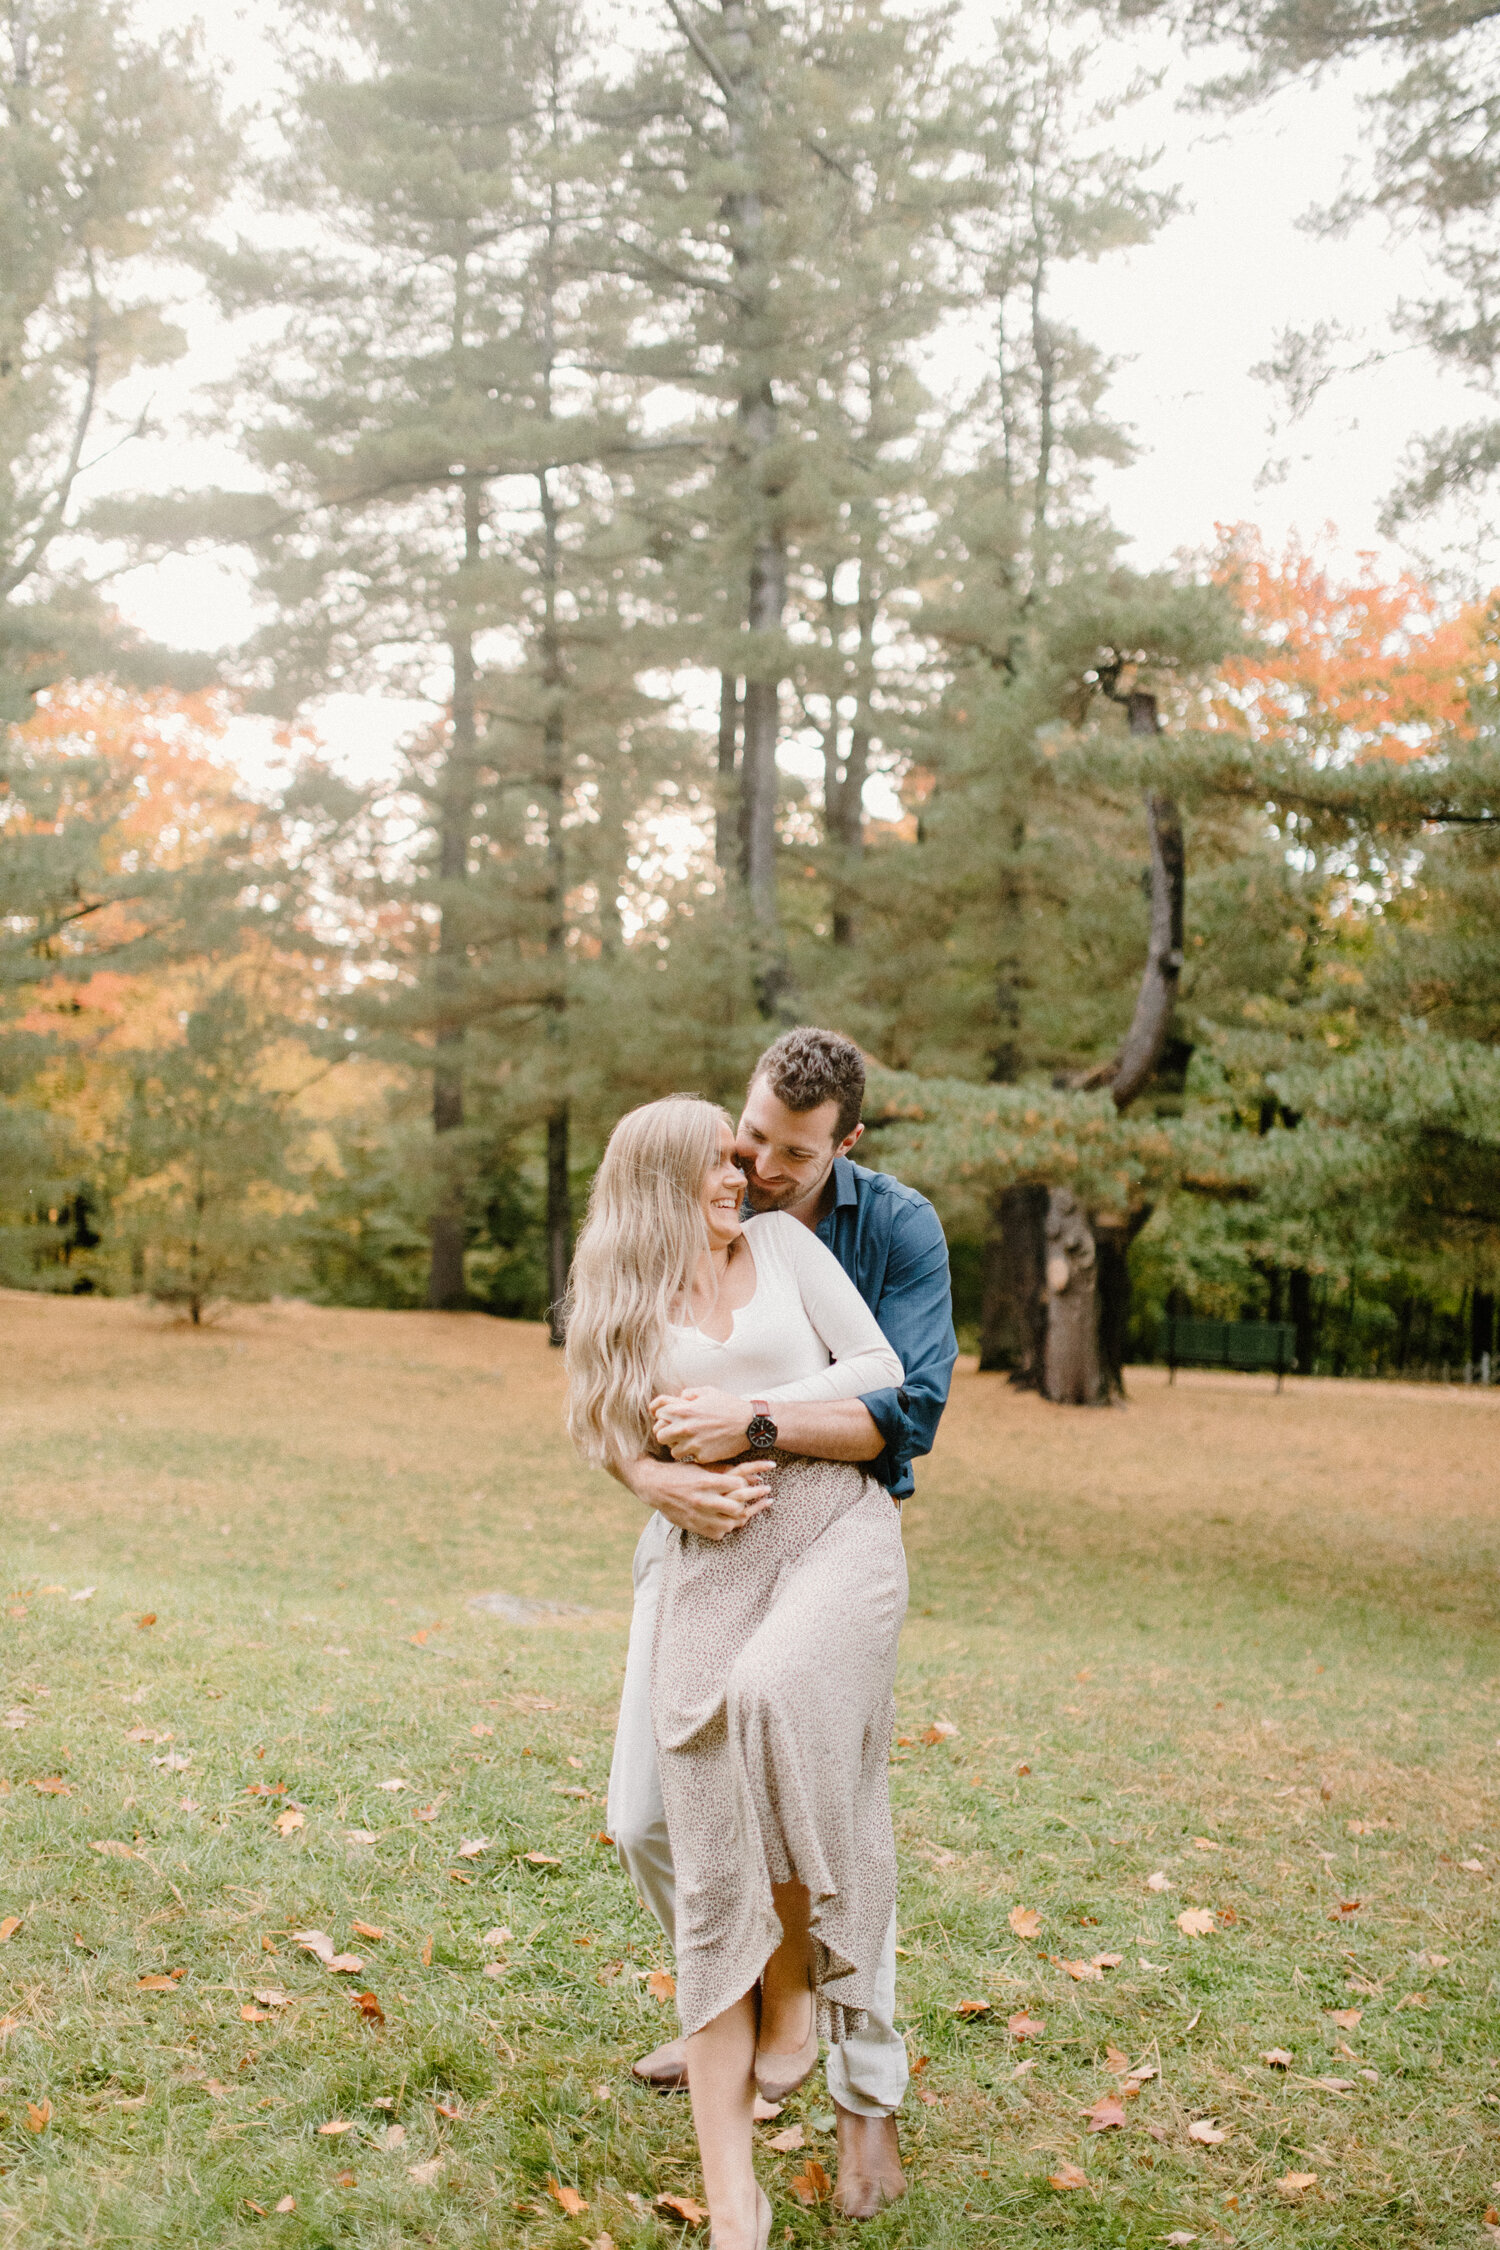  Playfully hugging his fiance from behind, Quebec Canada photographer, Chelsea Mason Photography captures a playful moment between this couple. playful engagement session, man hugging fiance from behind, neutral engagement outfit colors, autumn coupl